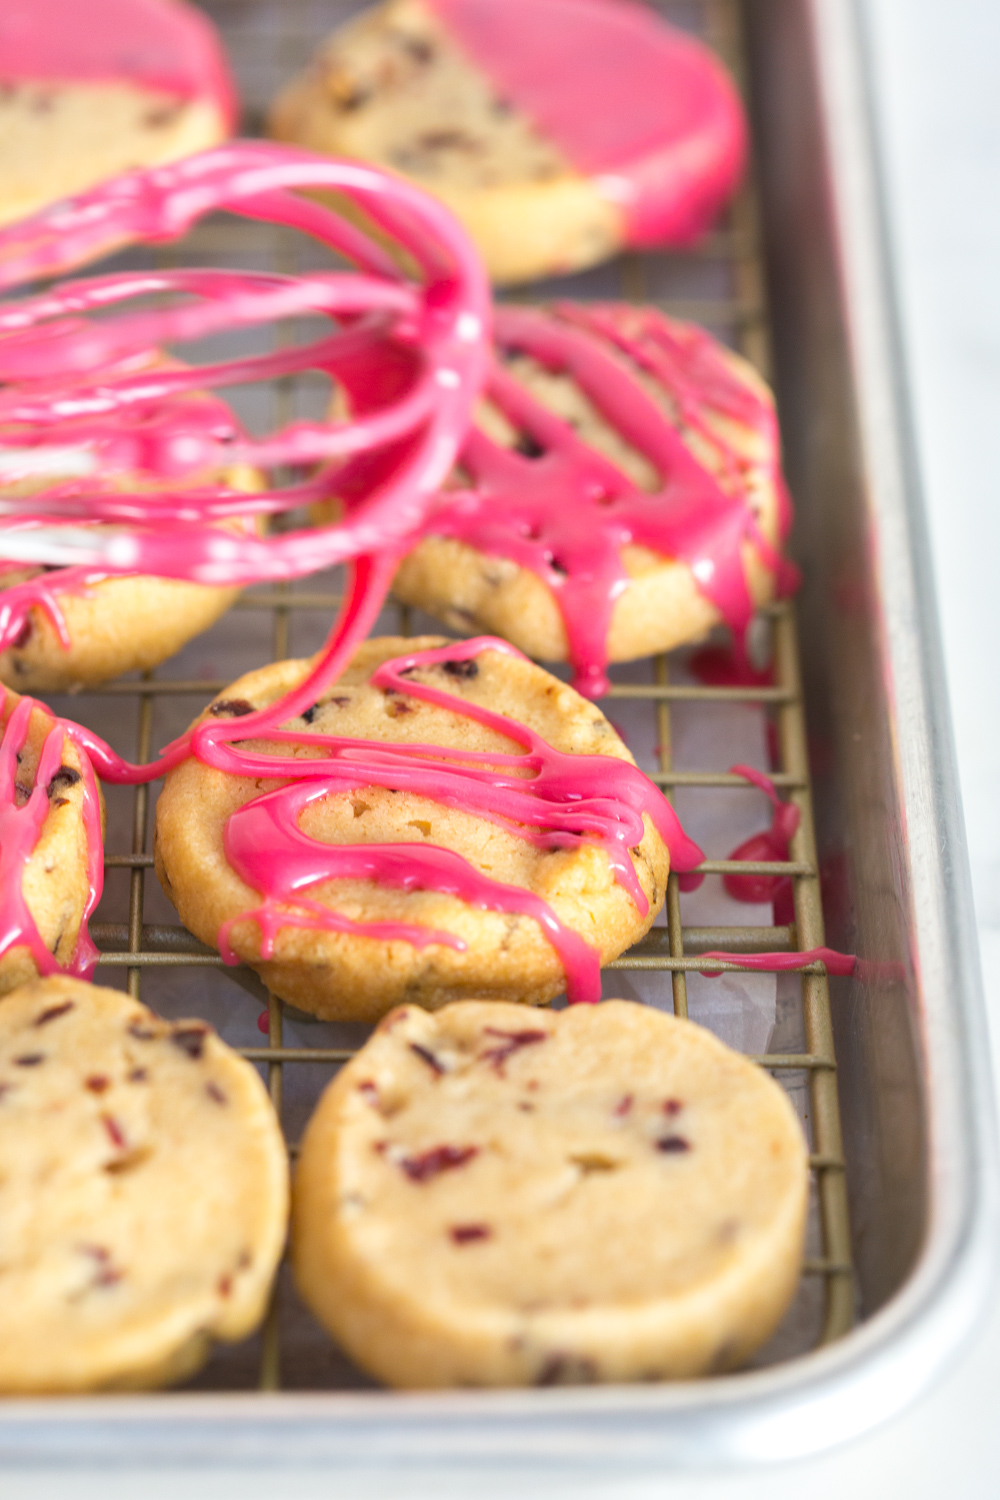 Drizzling the Glazed Hibiscus Shortbread Cookies with glaze